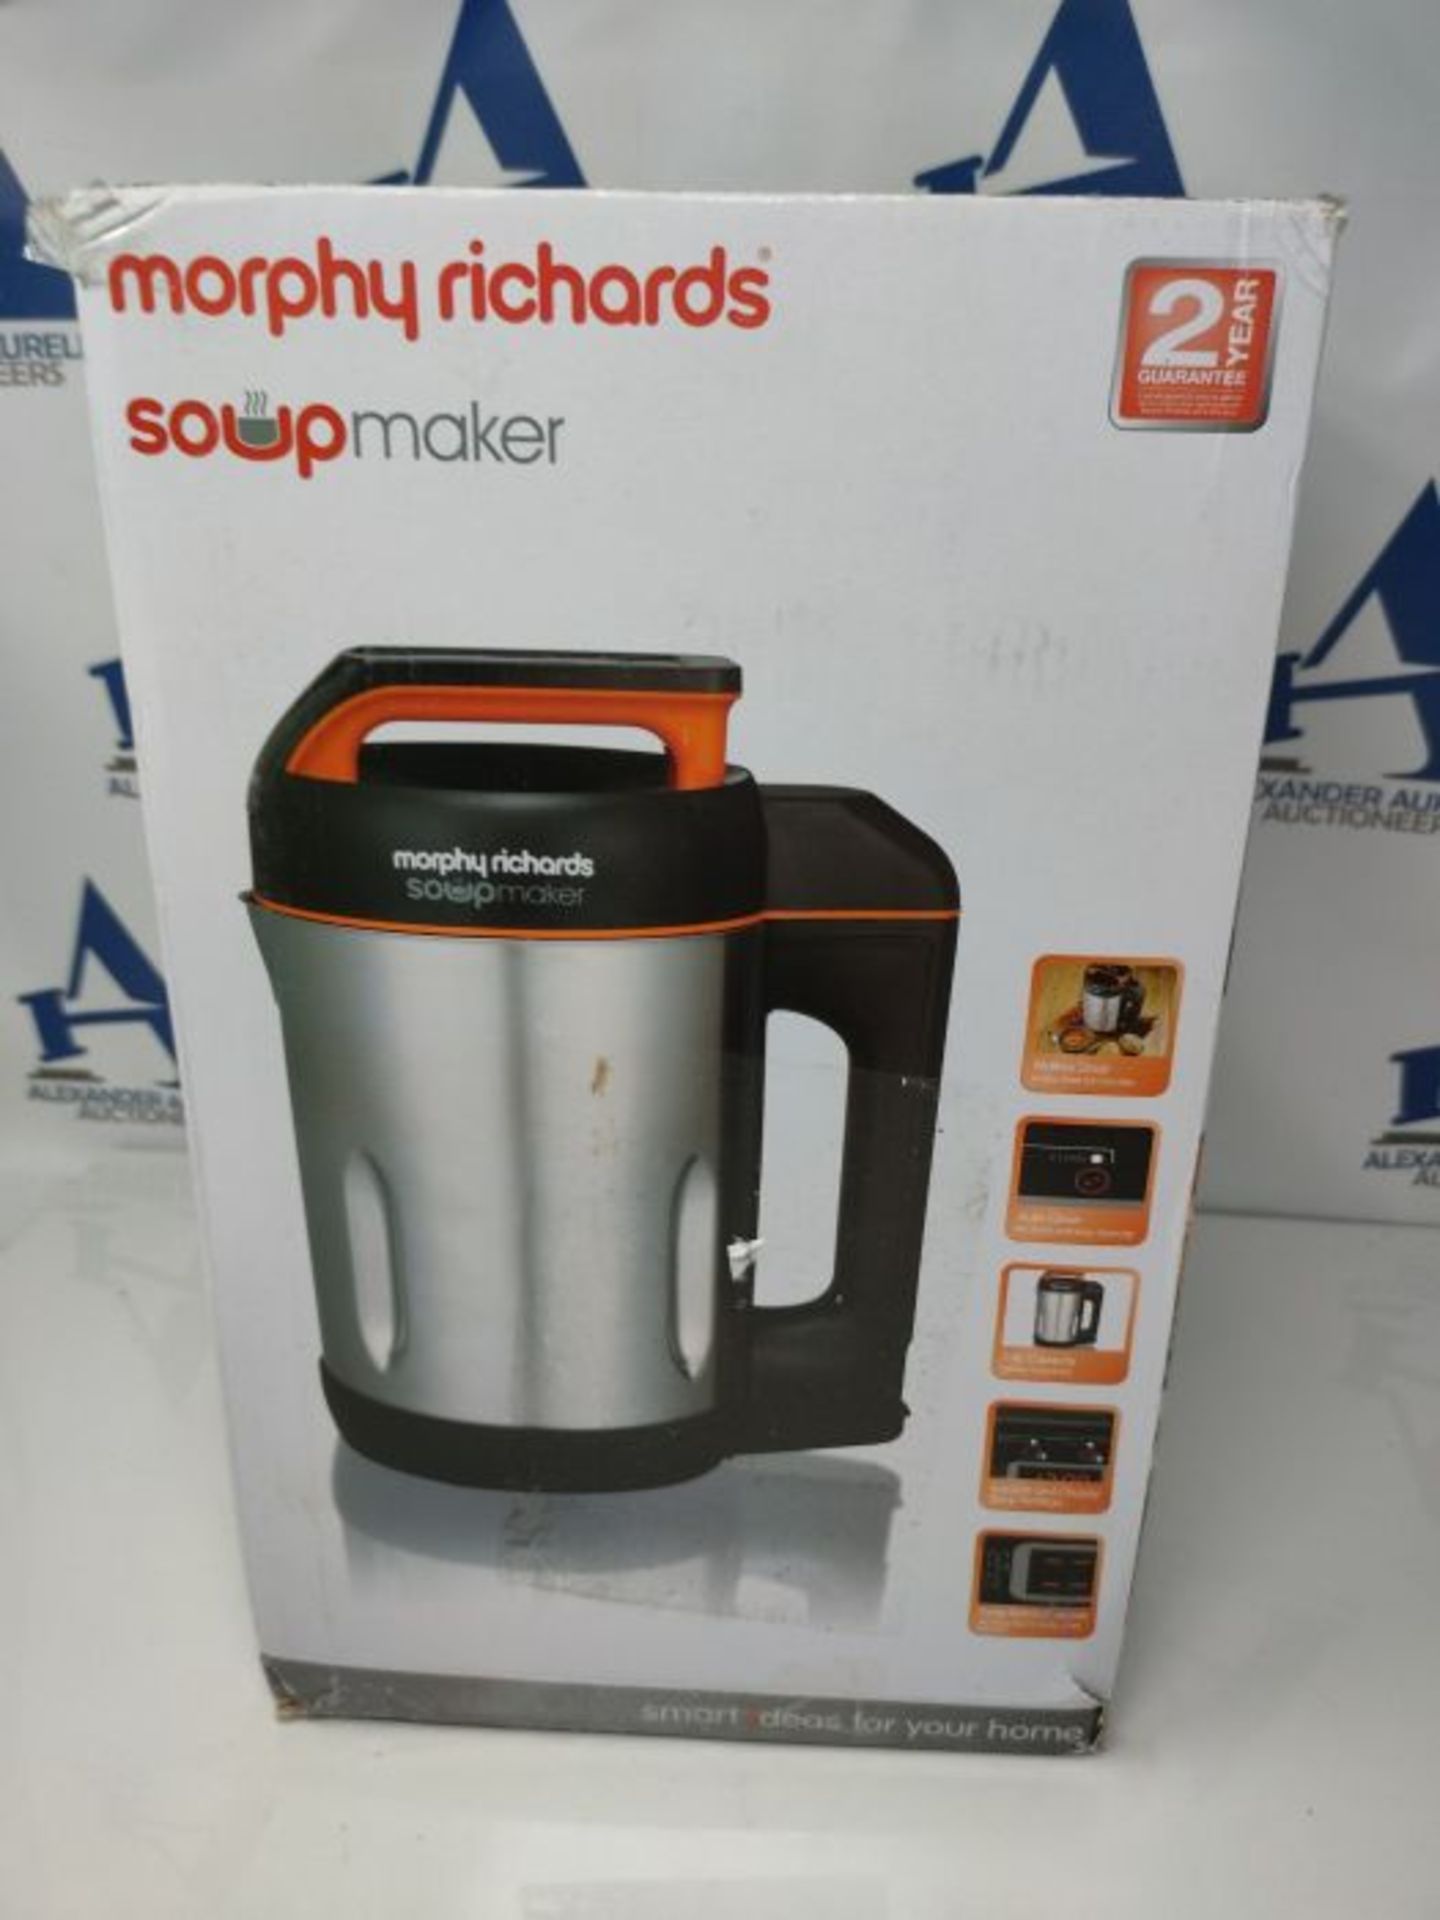 RRP £84.00 Morphy Richards Soup Maker - Metal - 1.6L - Stainless Steel - 501022 - Image 2 of 3